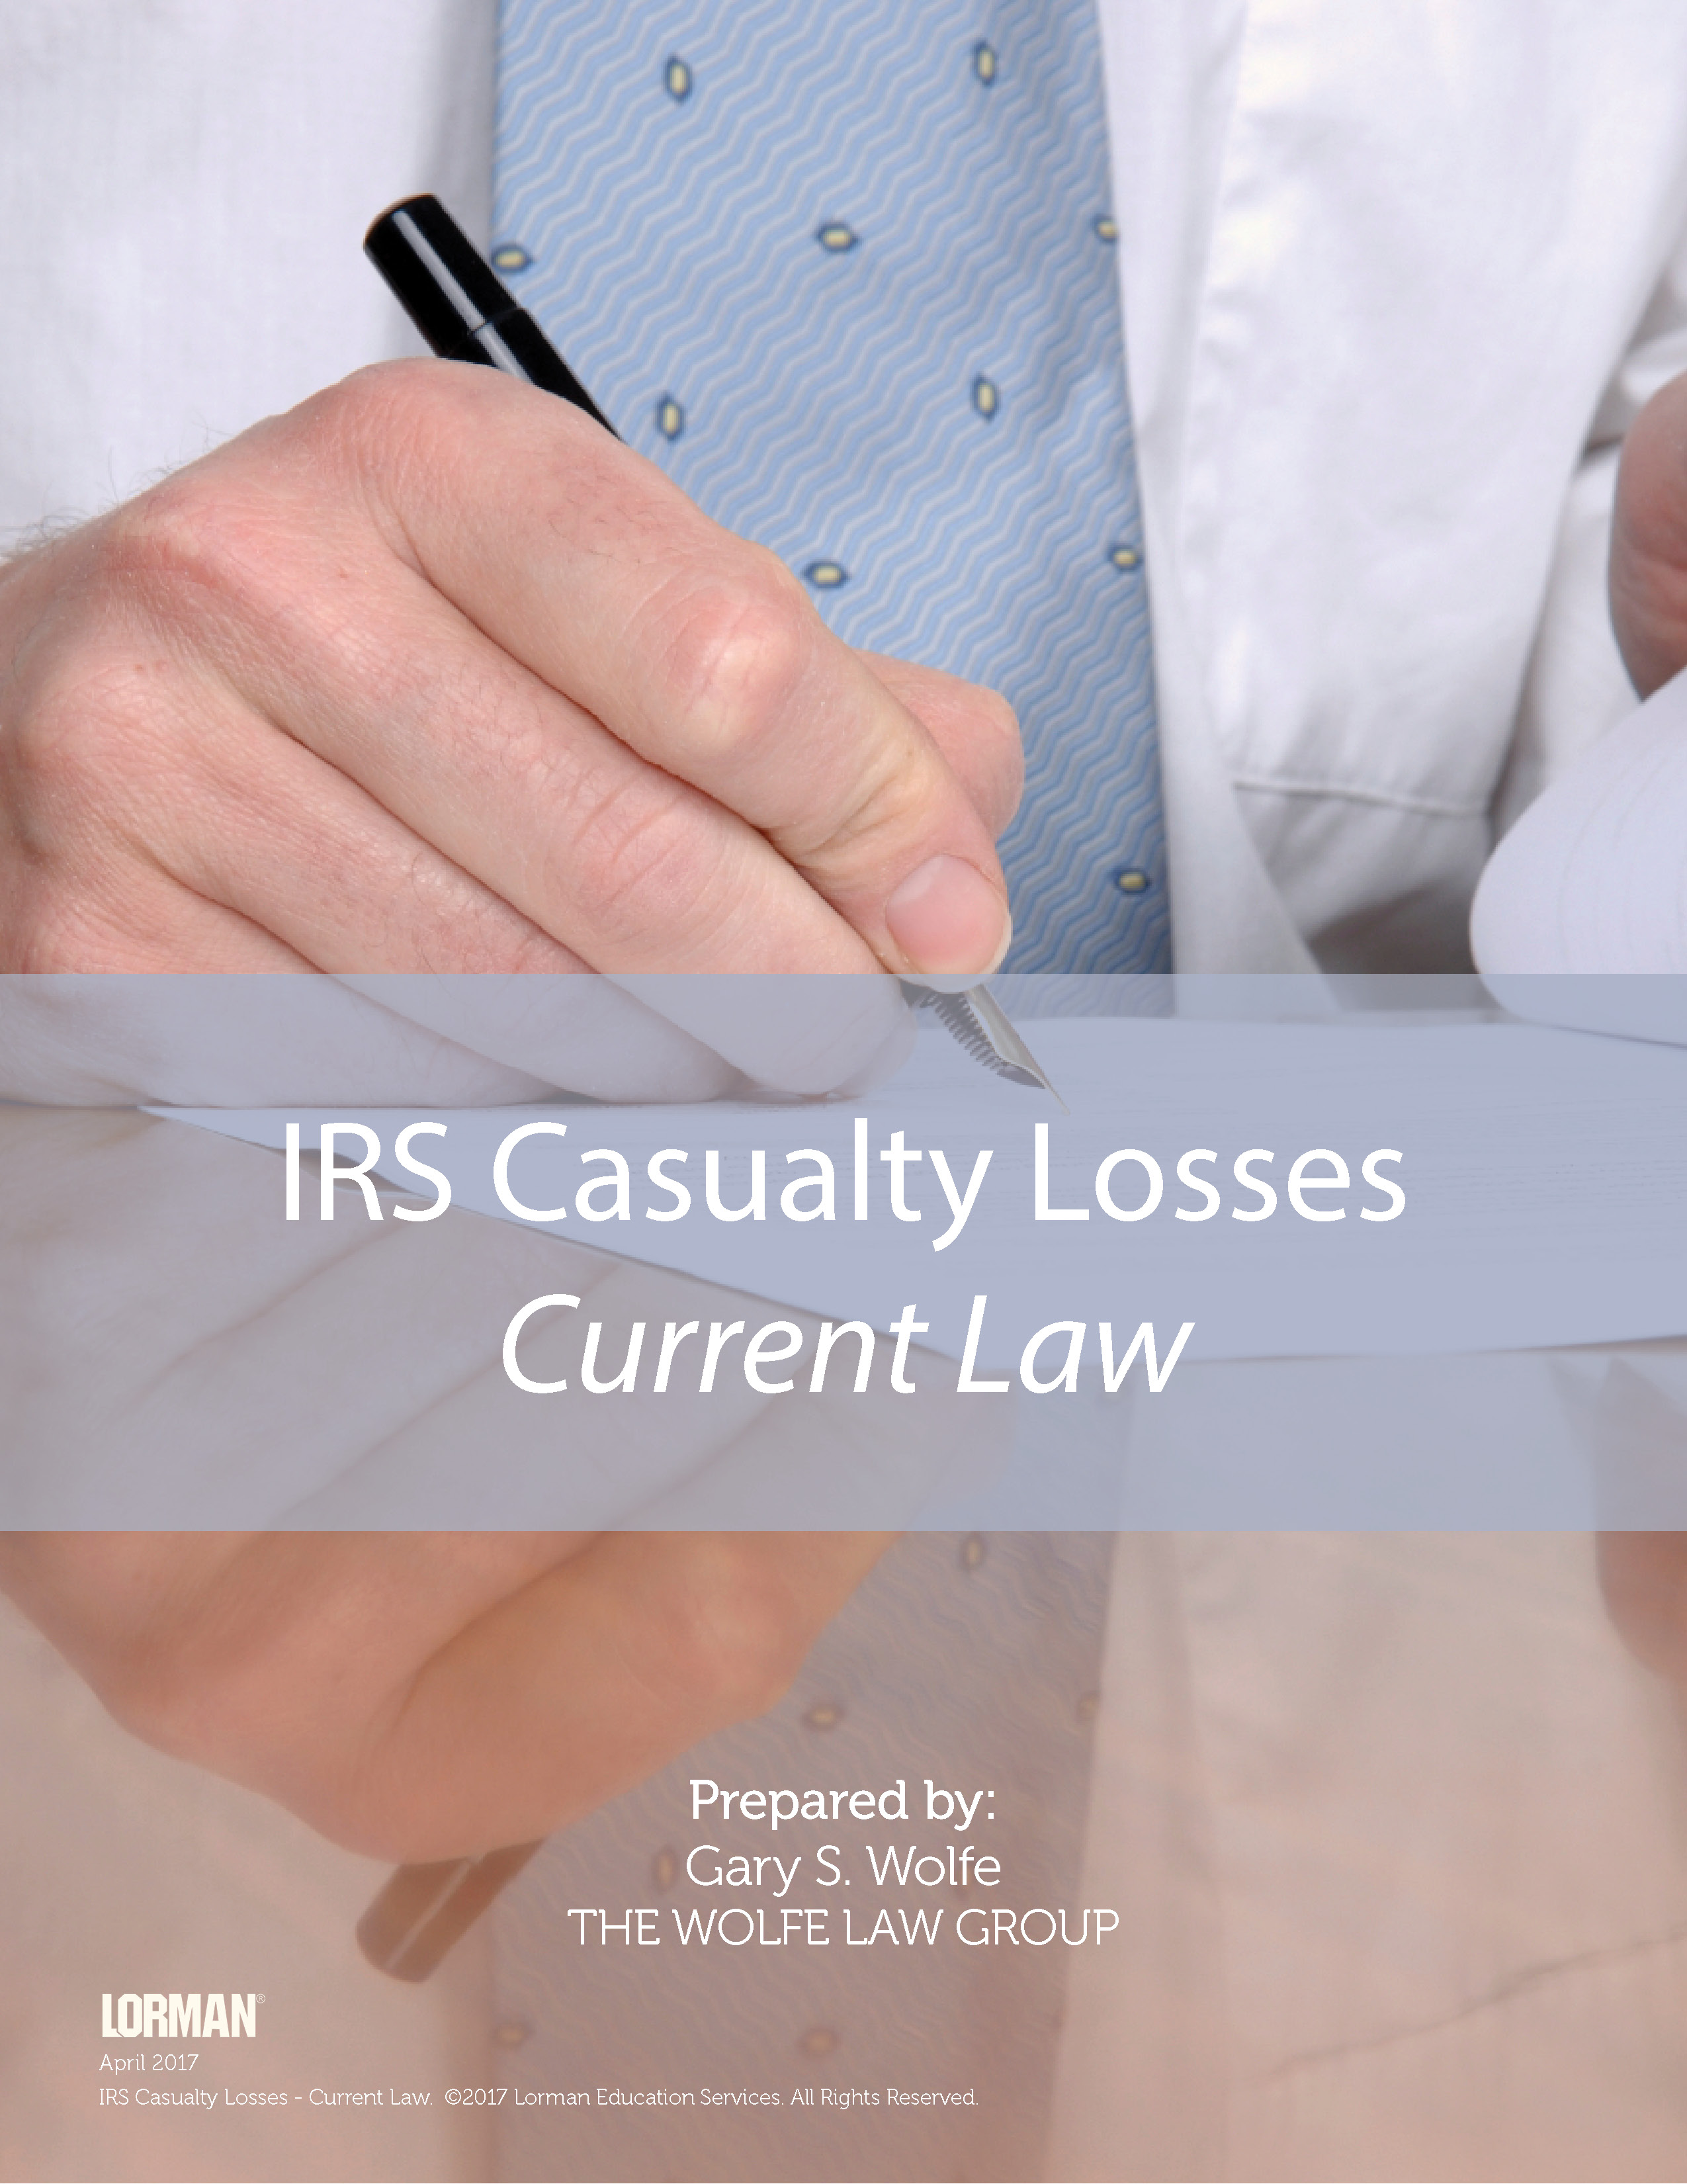 IRS Casualty Losses - Current Law